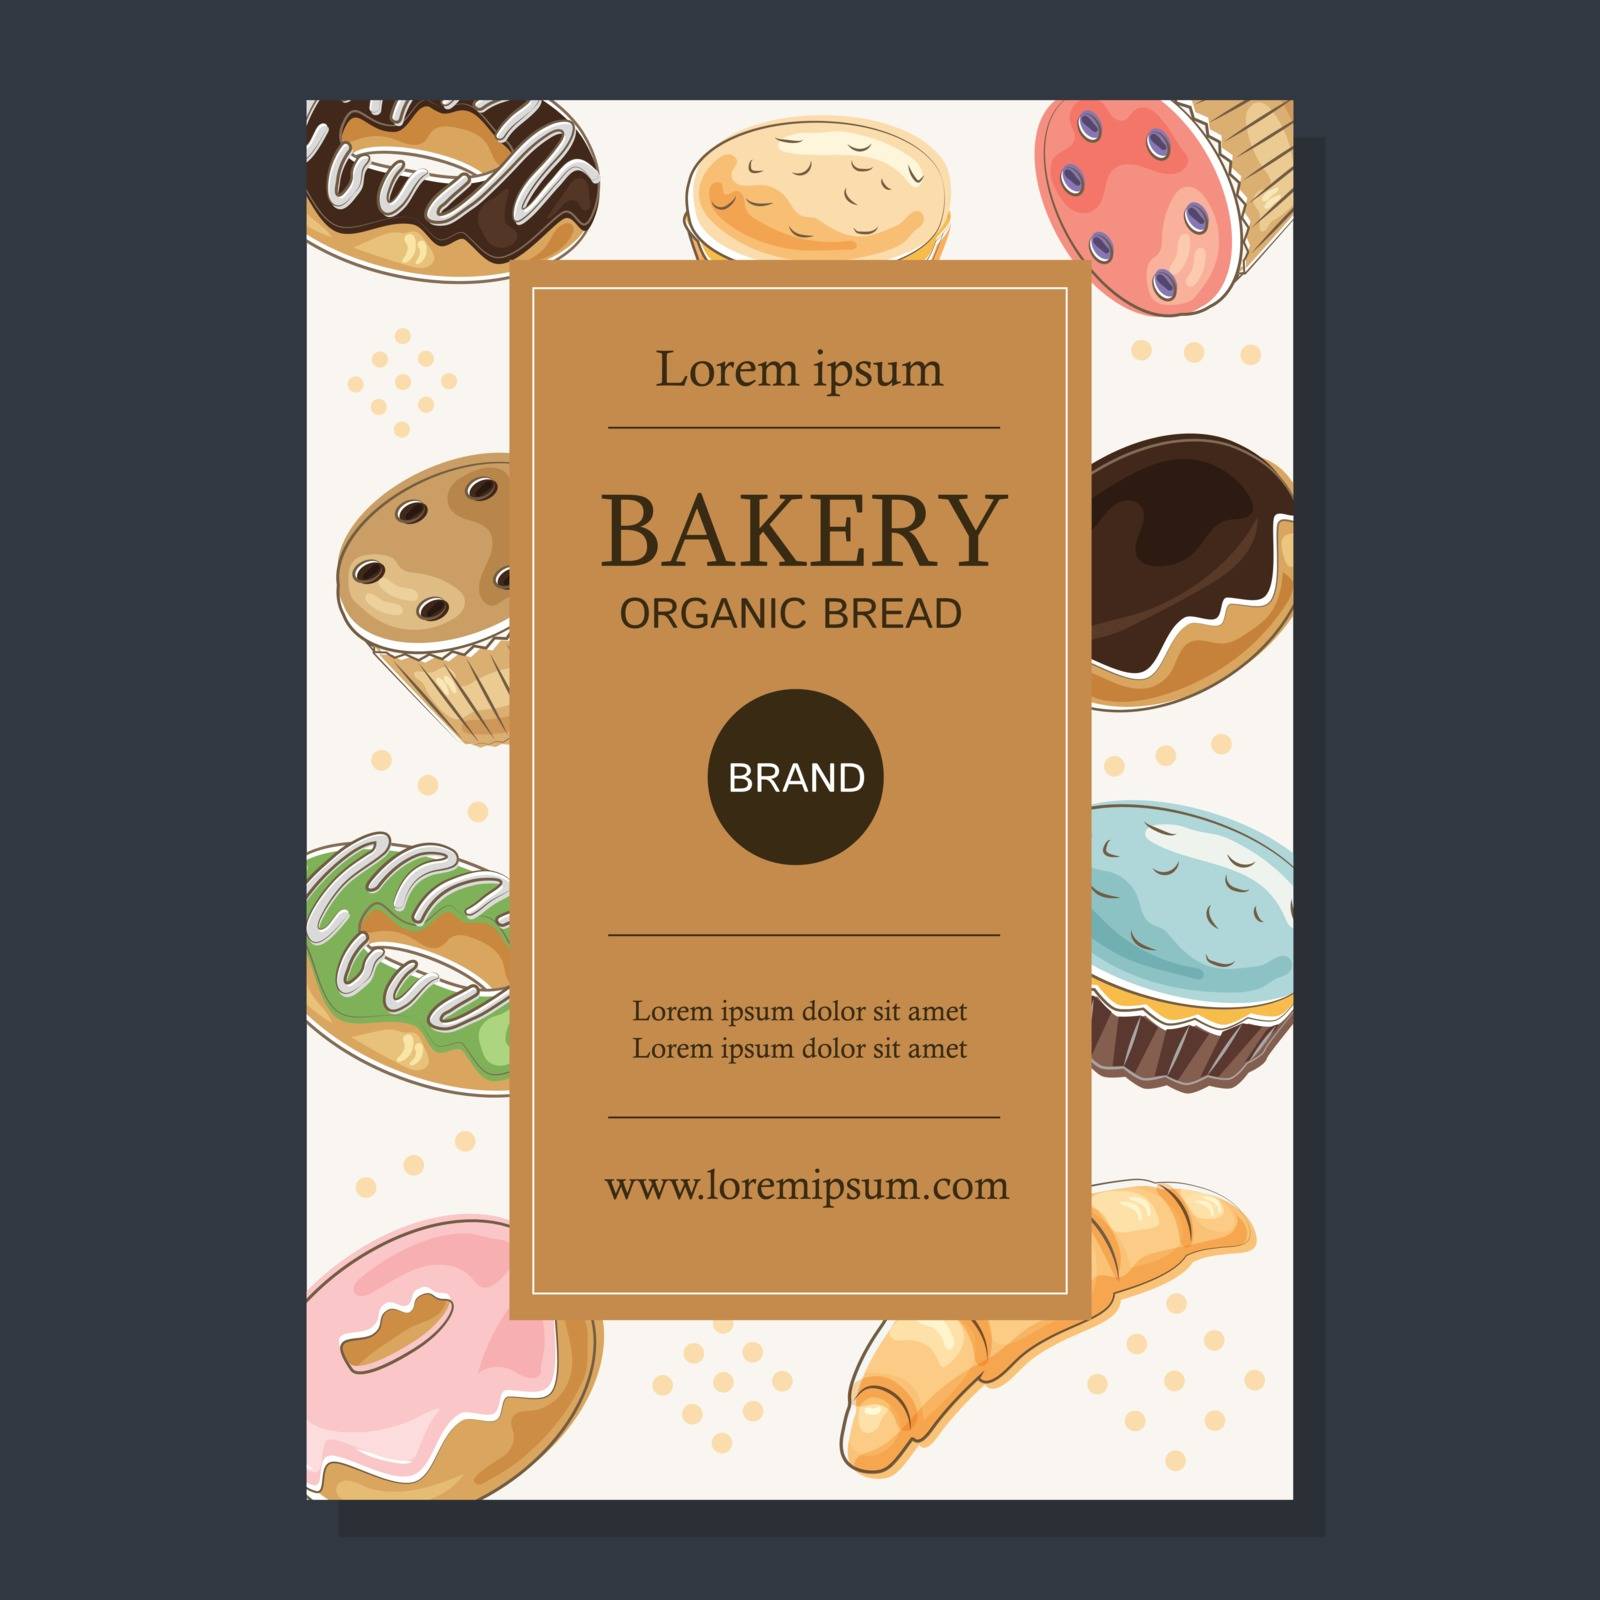 Bakery sale layout decorate with doodle style for shopping sale or promo poster and frame leaflet or web banner.Vector illustration template.